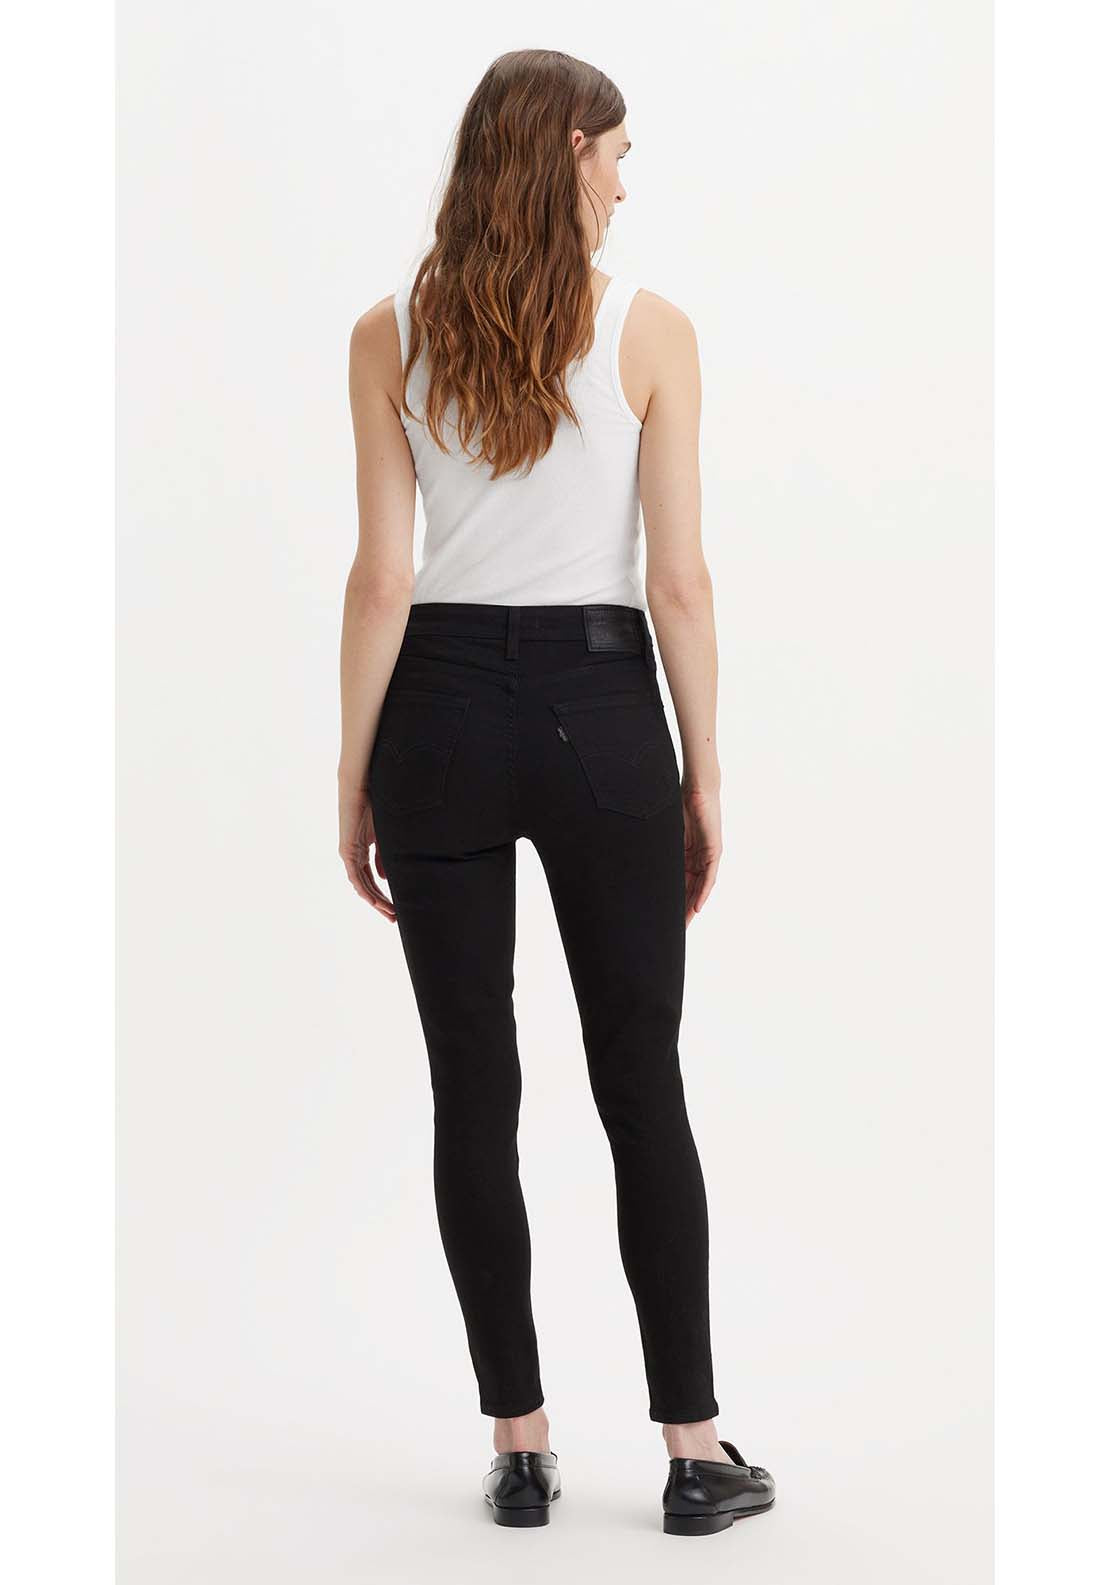 Levis 721 High Rise Skinny Jean 3 Shaws Department Stores